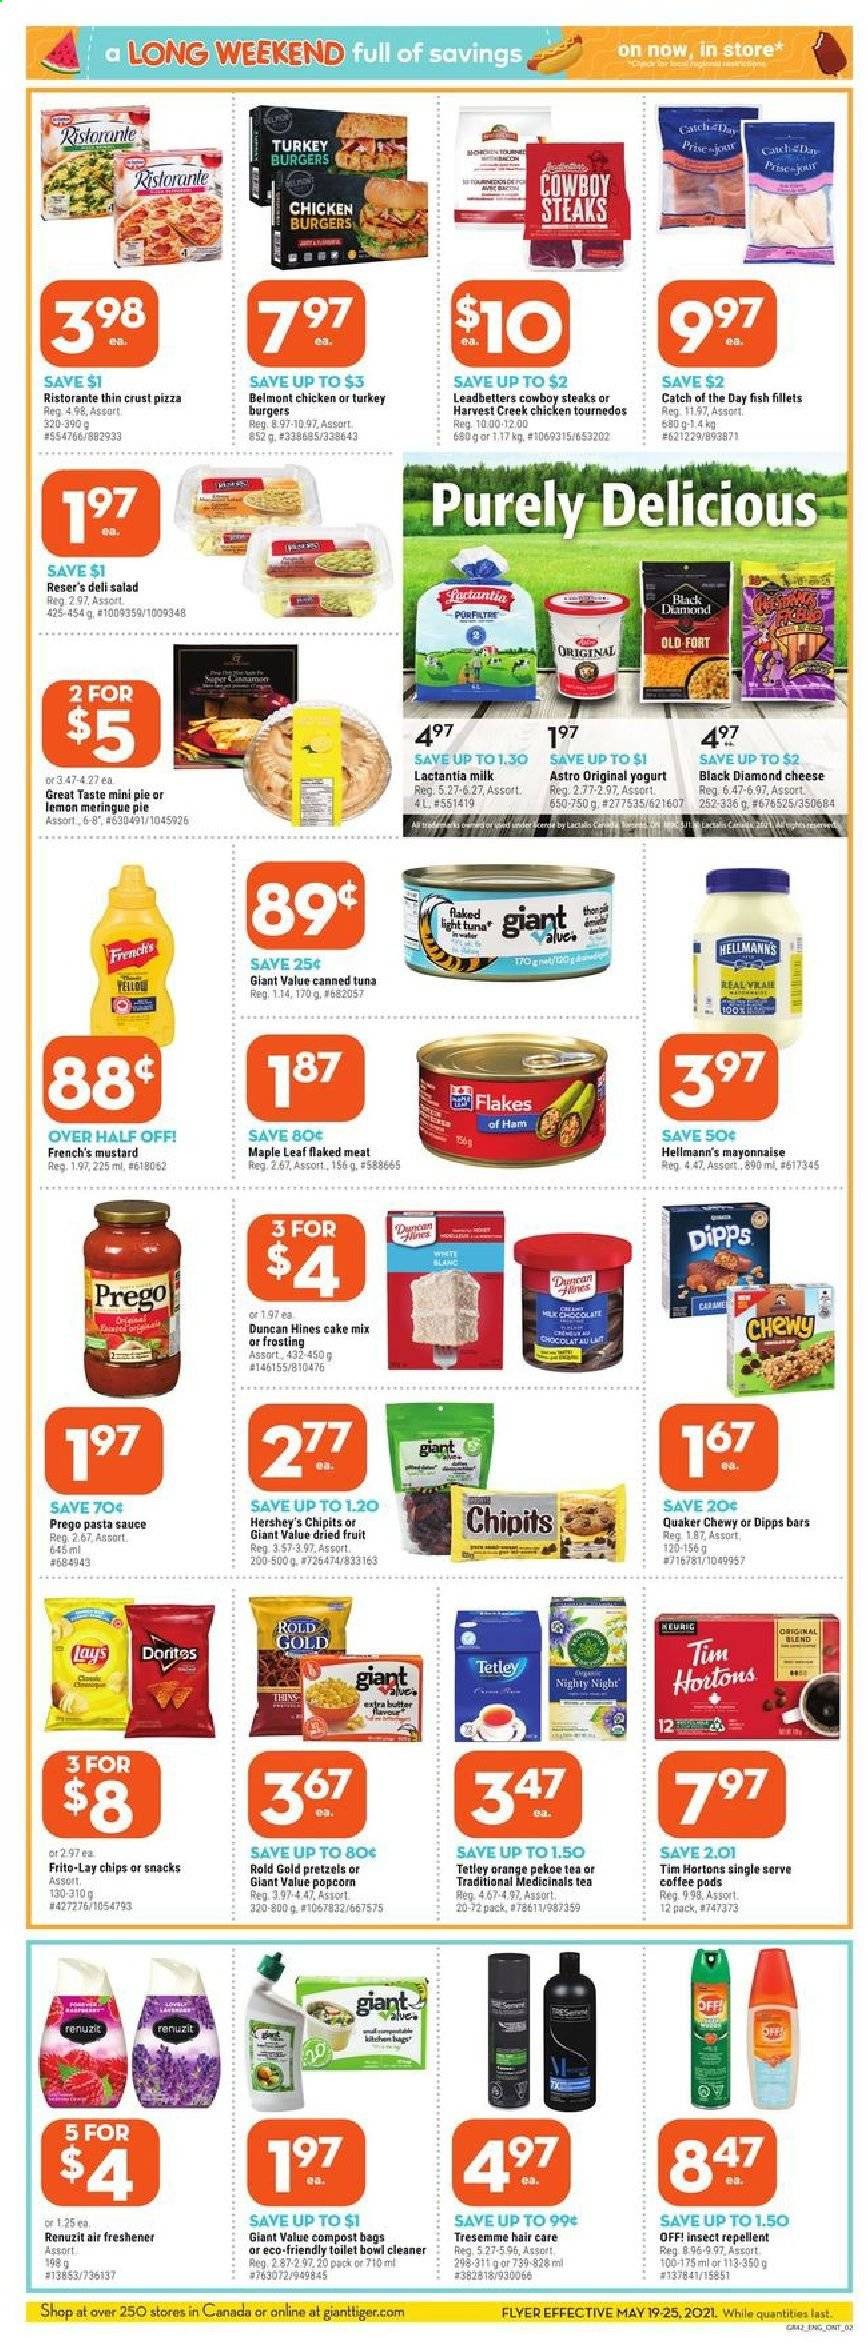 thumbnail - Giant Tiger Flyer - May 19, 2021 - May 25, 2021 - Sales products - pretzels, pie, cake mix, salad, fish fillets, tuna, fish, pizza, pasta sauce, hamburger, sauce, Quaker, ham, yoghurt, milk, butter, mayonnaise, Hellmann’s, Hershey's, Lay’s, Thins, popcorn, Frito-Lay, frosting, canned tuna, light tuna, mustard, dried fruit, tea, coffee pods, Keurig, turkey burger, cleaner, toilet bowl, TRESemmé, bag, repellent, Renuzit, air freshener, toilet, compost, chips, steak. Page 2.